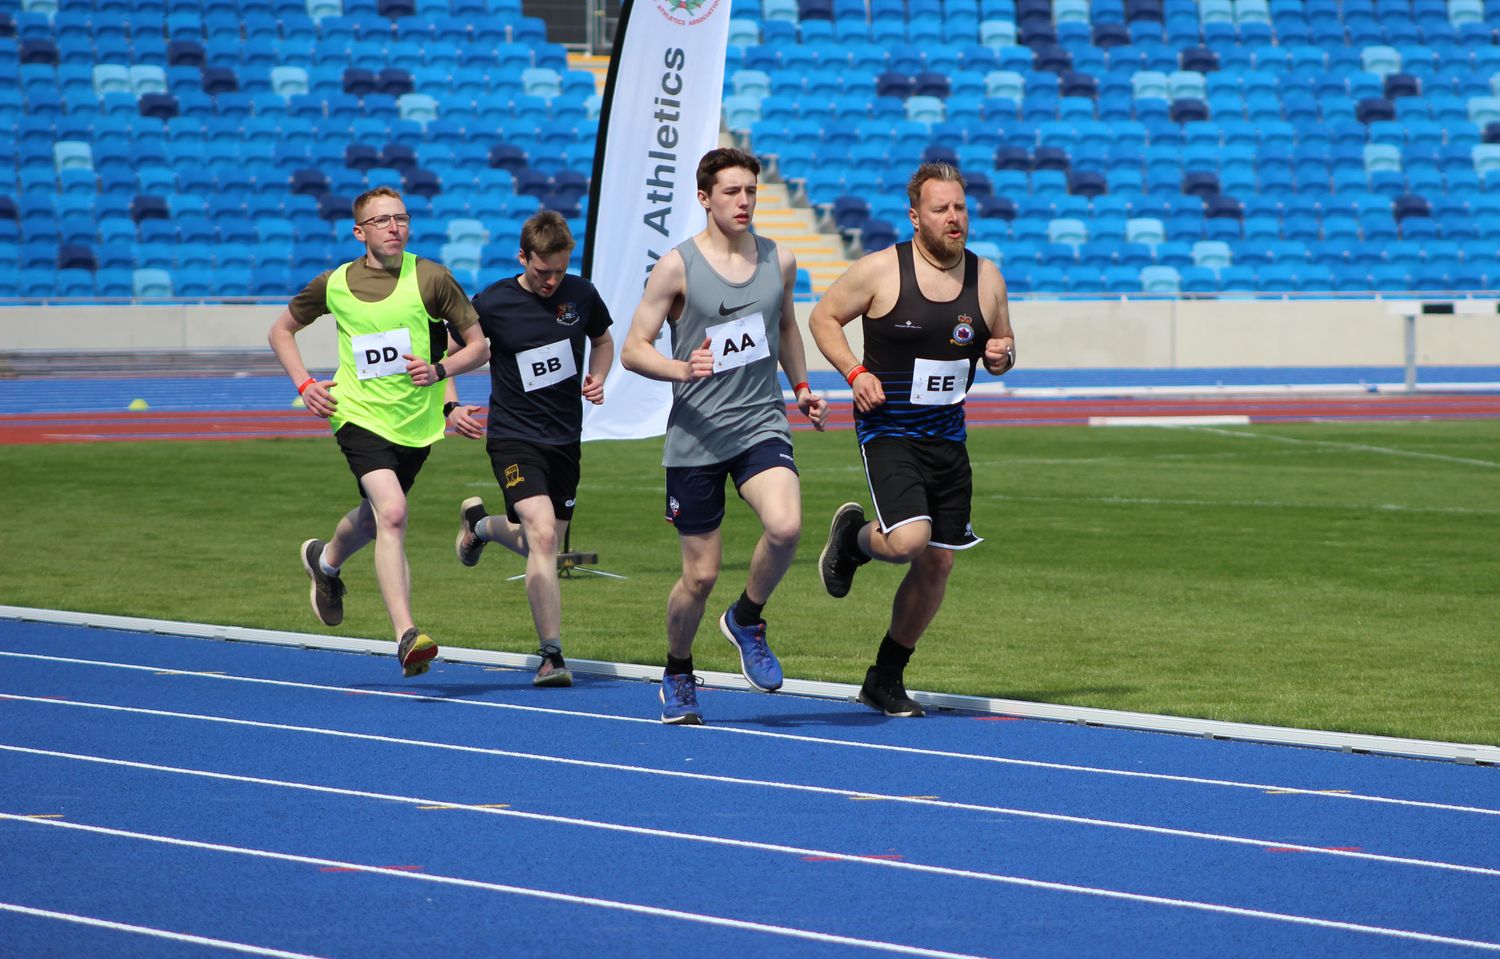 Individual team members from the Army are running along a blue running track as a tight-knit group to compete for the winning places on one of the long distance running track events at the Midlands Army Athletics Championships.